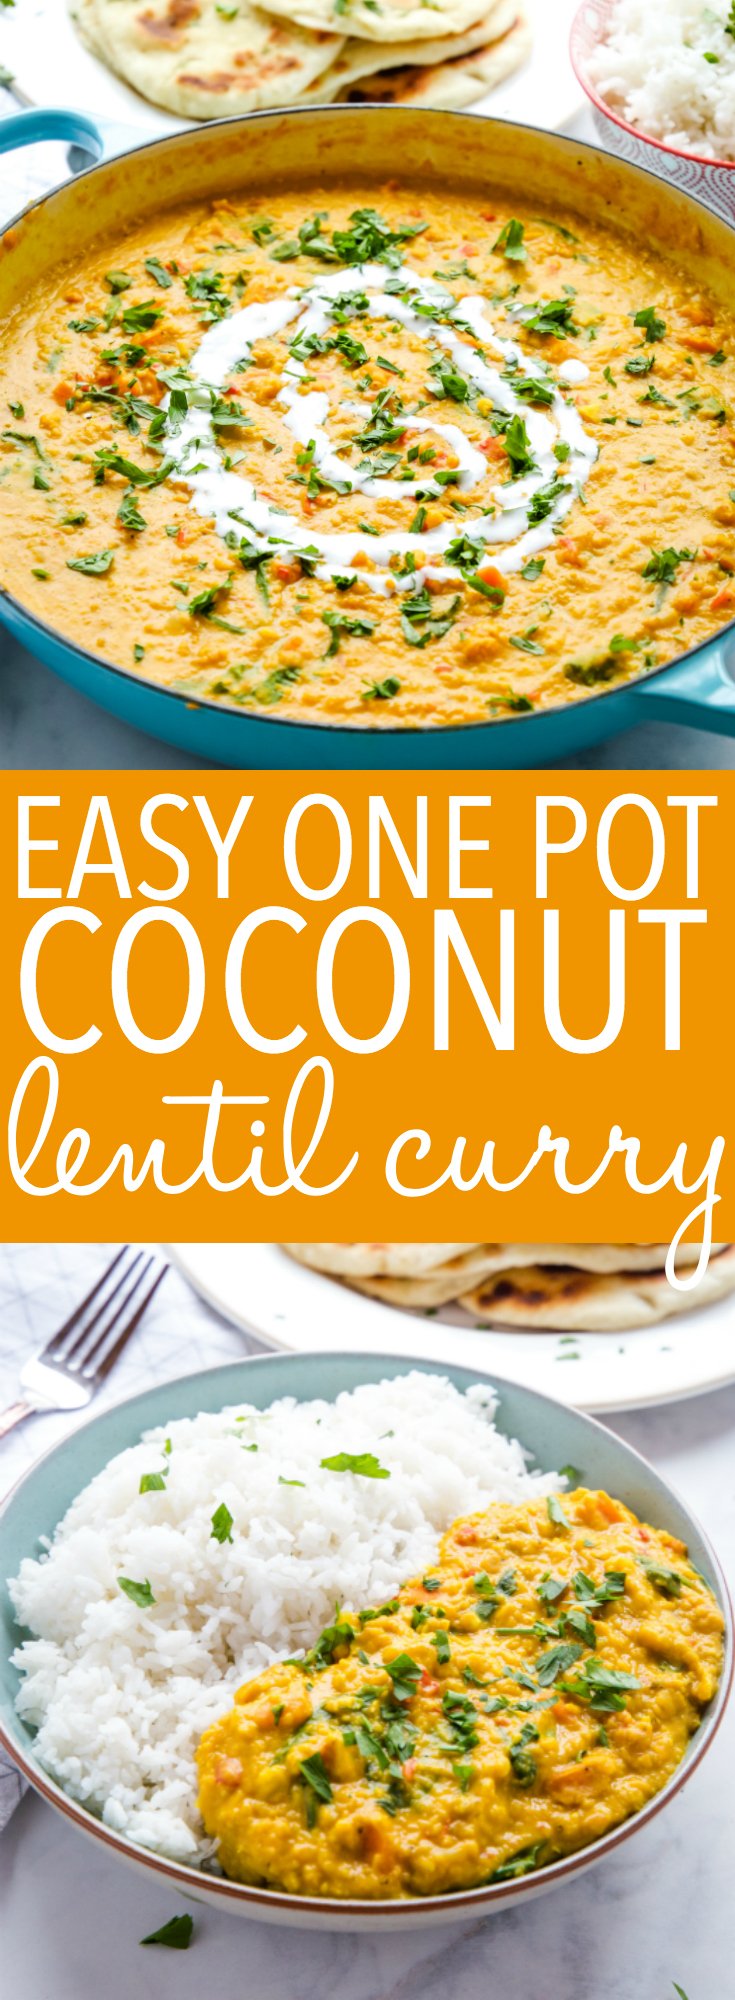 This Easy One Pan Lentil Daal Curry is the perfect easy and healthy weeknight meal that can be made vegetarian, vegan and dairy-free!  Recipe from thebusybaker.ca! #curry #daal #homemade #indianfood #easyindianfood #recipe #curryrecipe #coconutcurry #coconutmilk #vegetarian #vegan #dairyfree #healthy #vegetables #rice #naan via @busybakerblog